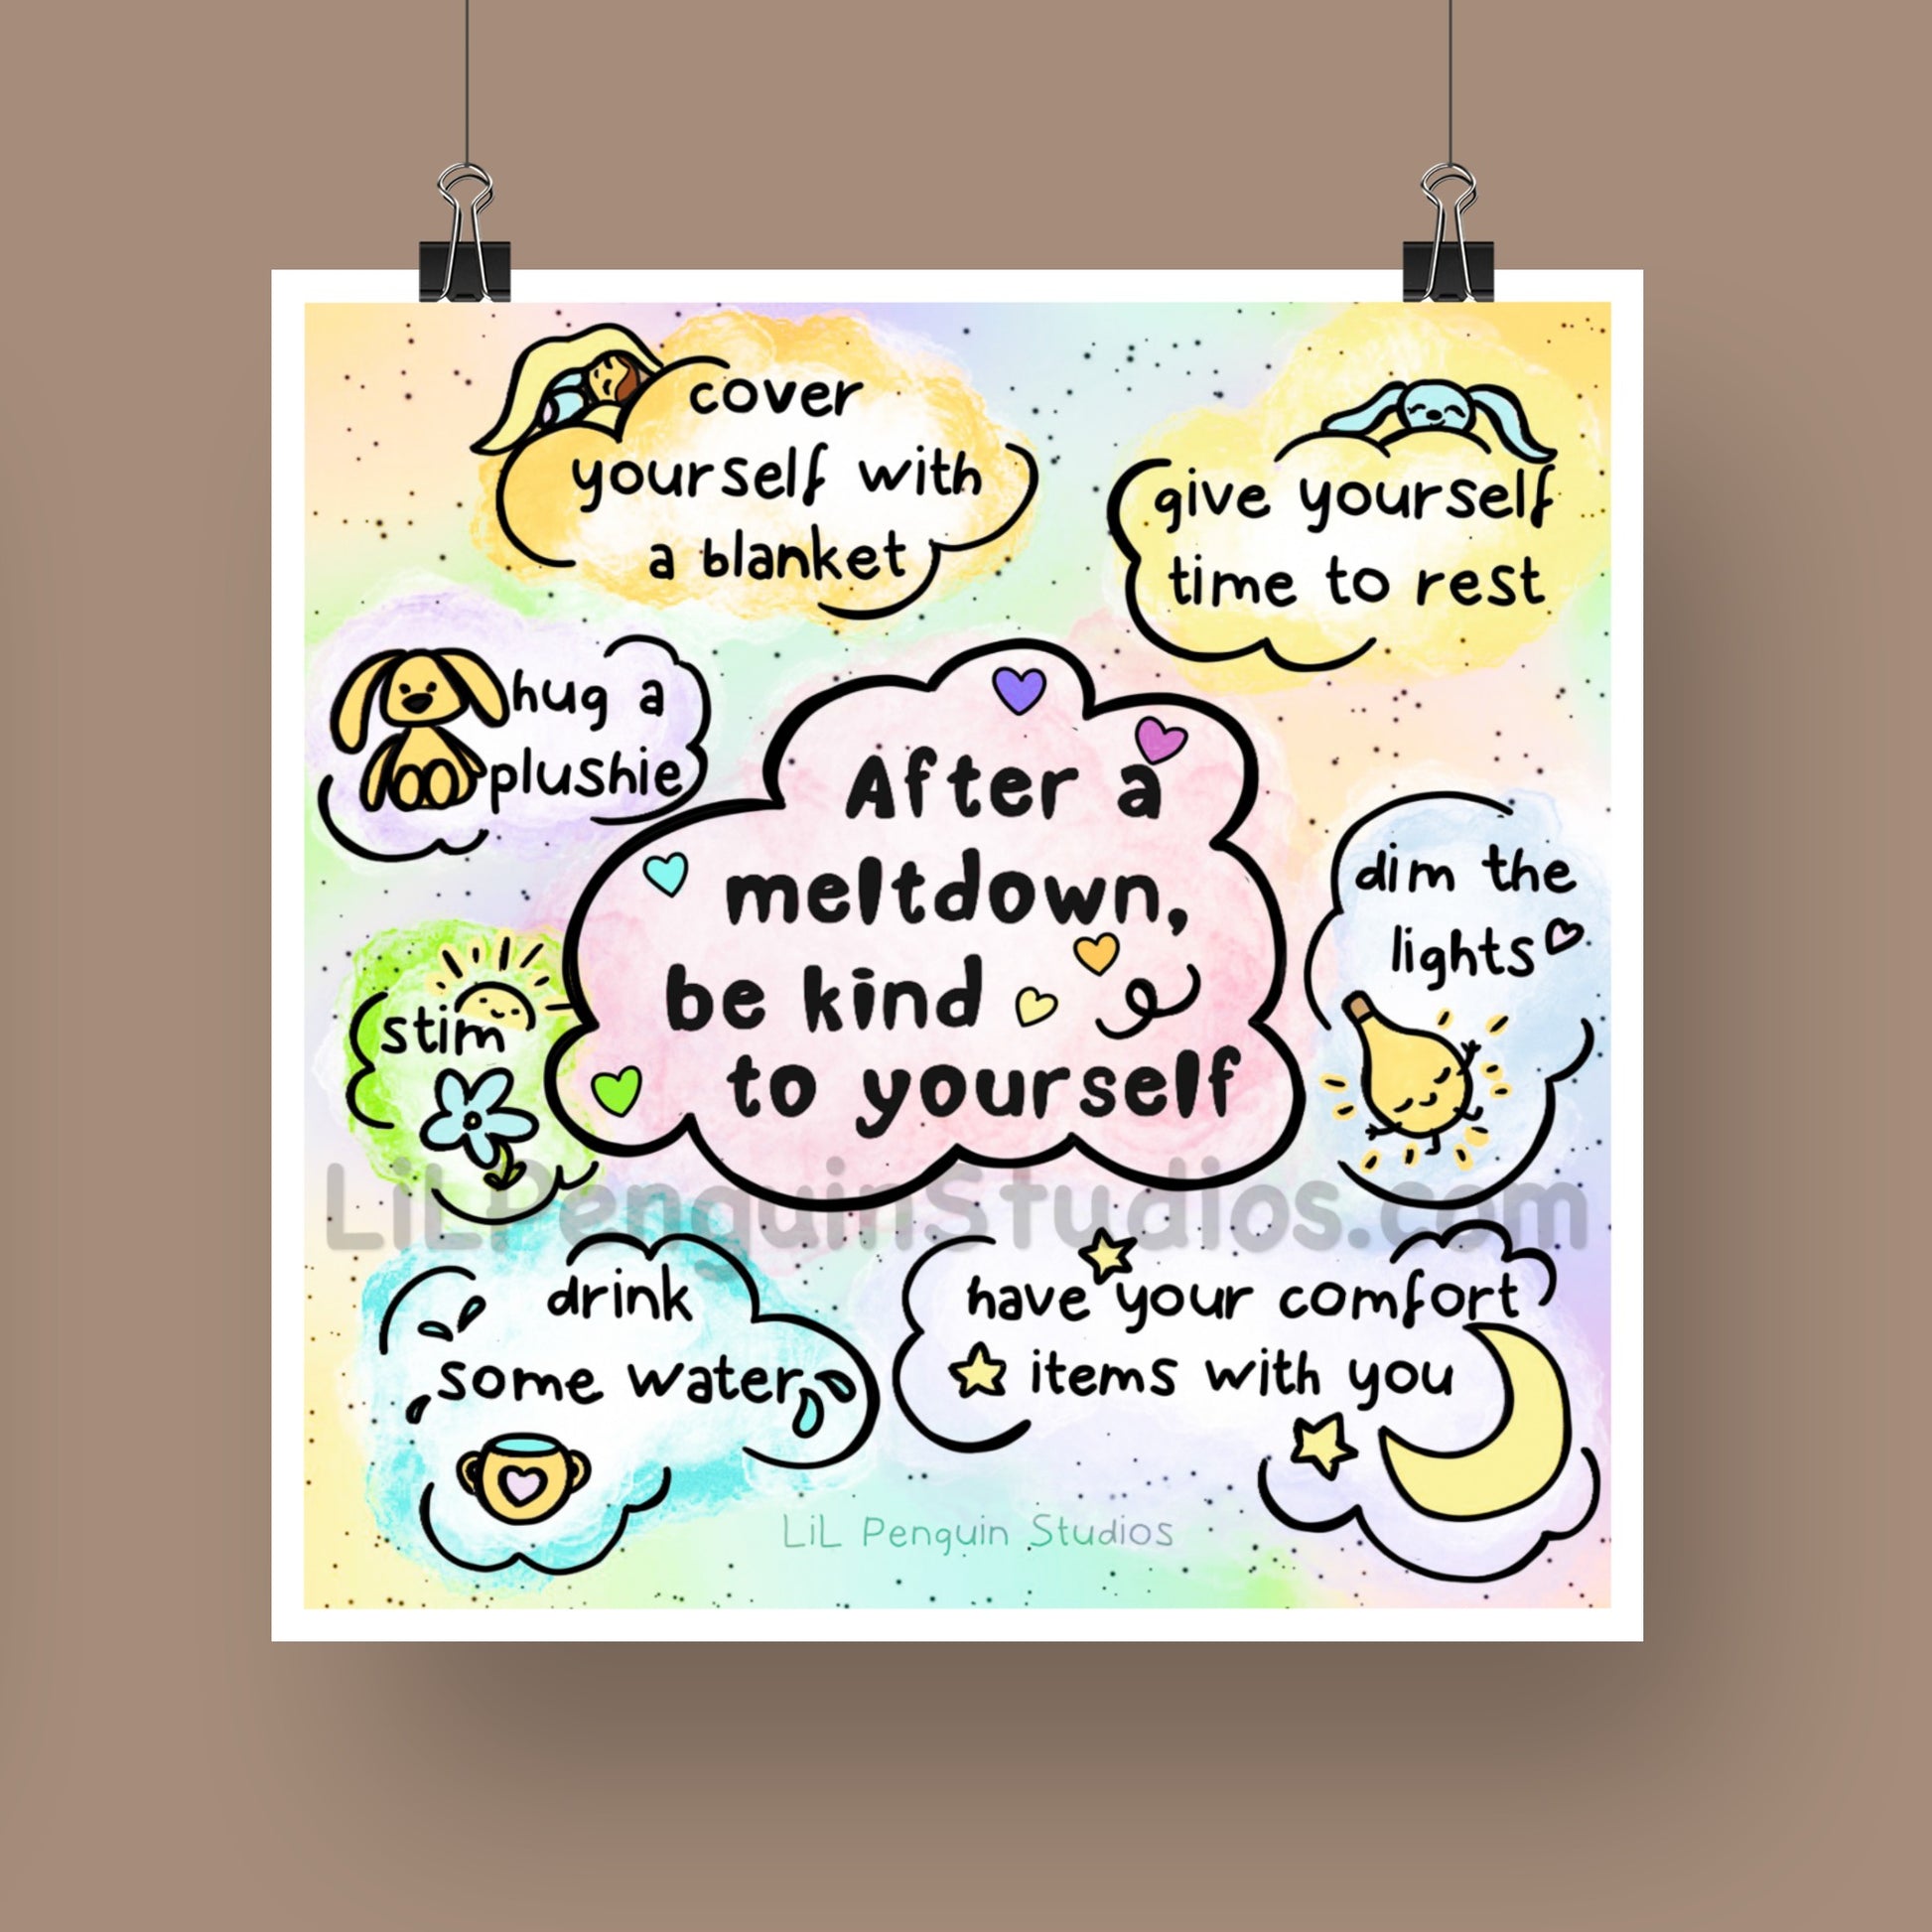 After a meltdown, be kind to yourself' DIGITAL Printable Art - Personal Use